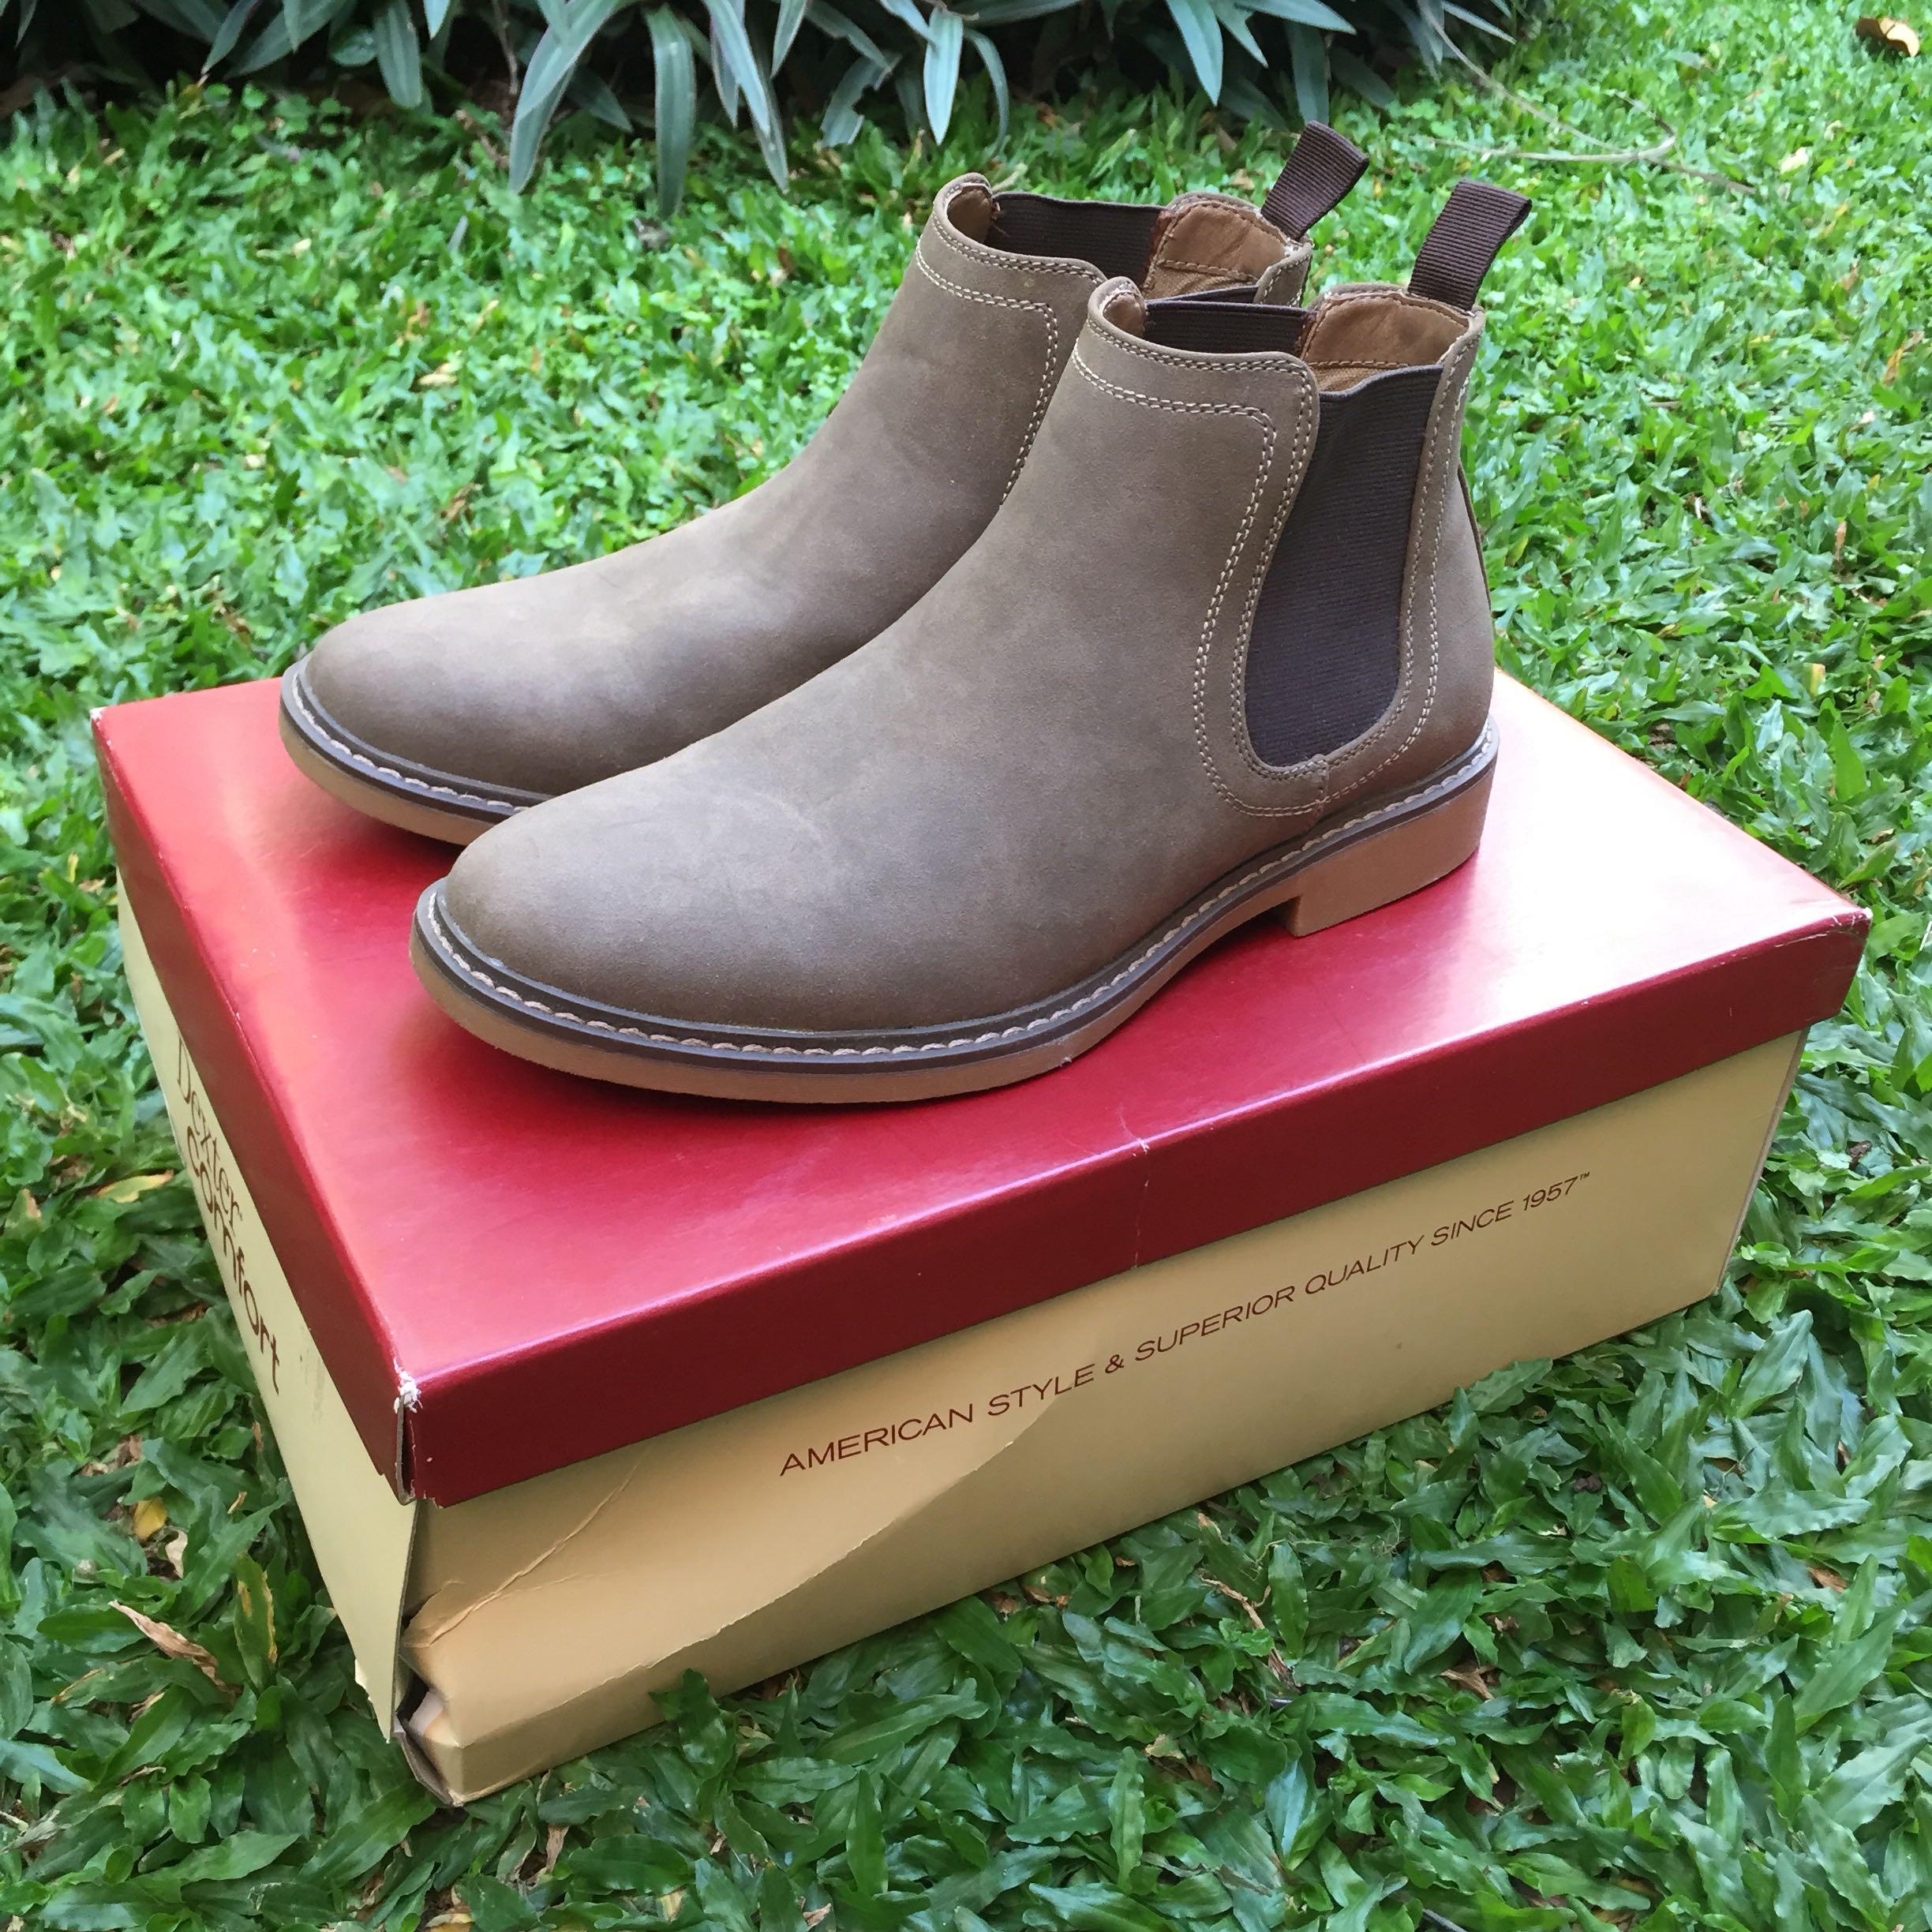 conor chelsea boots